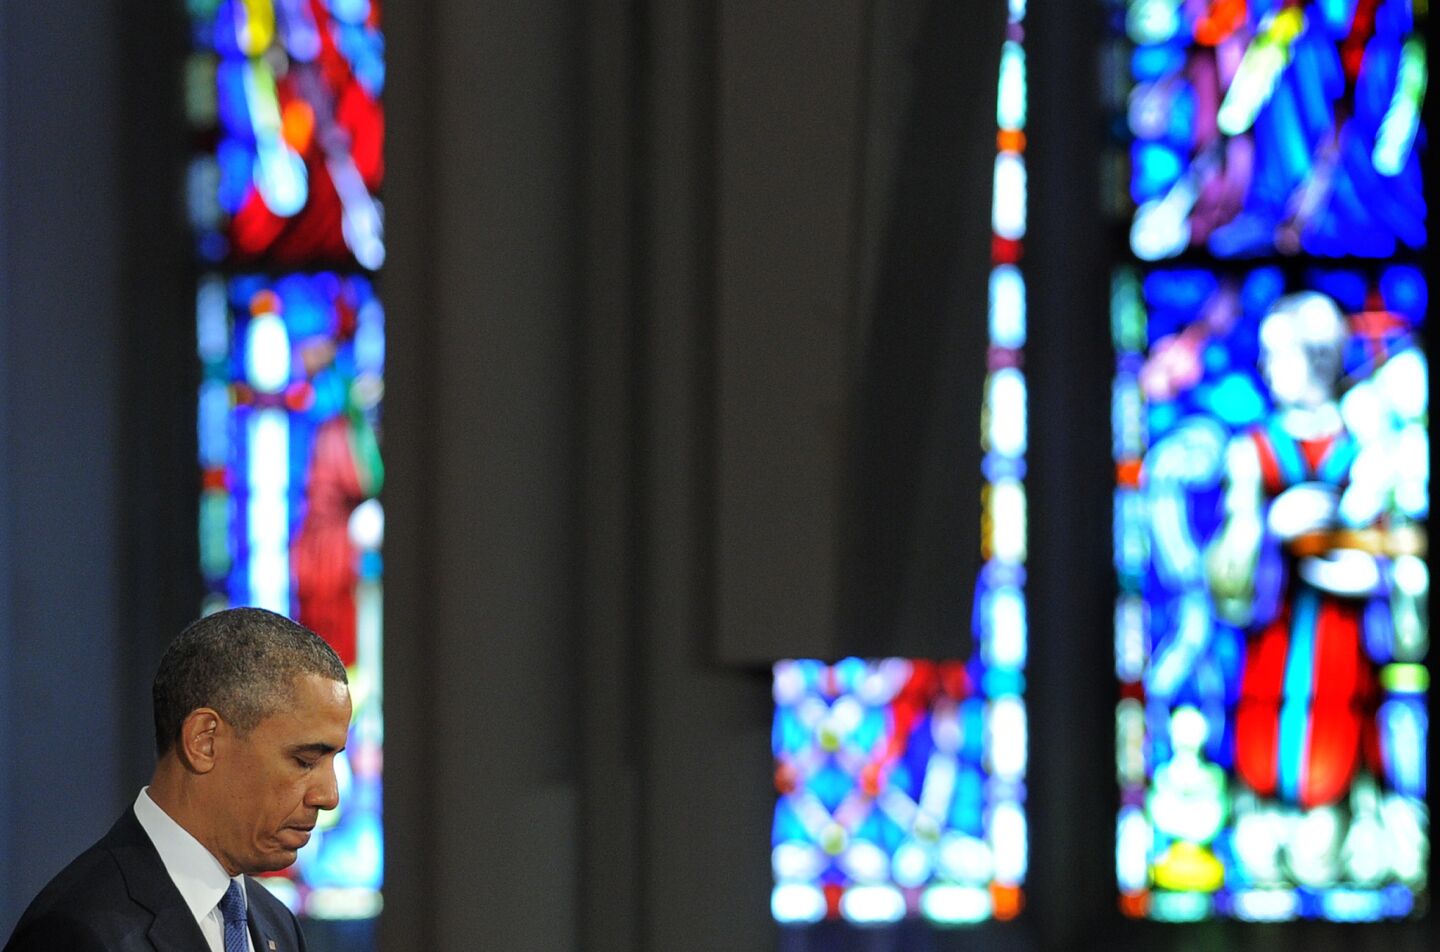 President Obama pauses while speaking at "Healing Our City: An Interfaith Service." The service, dedicated to victims of the Boston Marathon bombing, was held at the Cathedral of the Holy Cross in Boston.